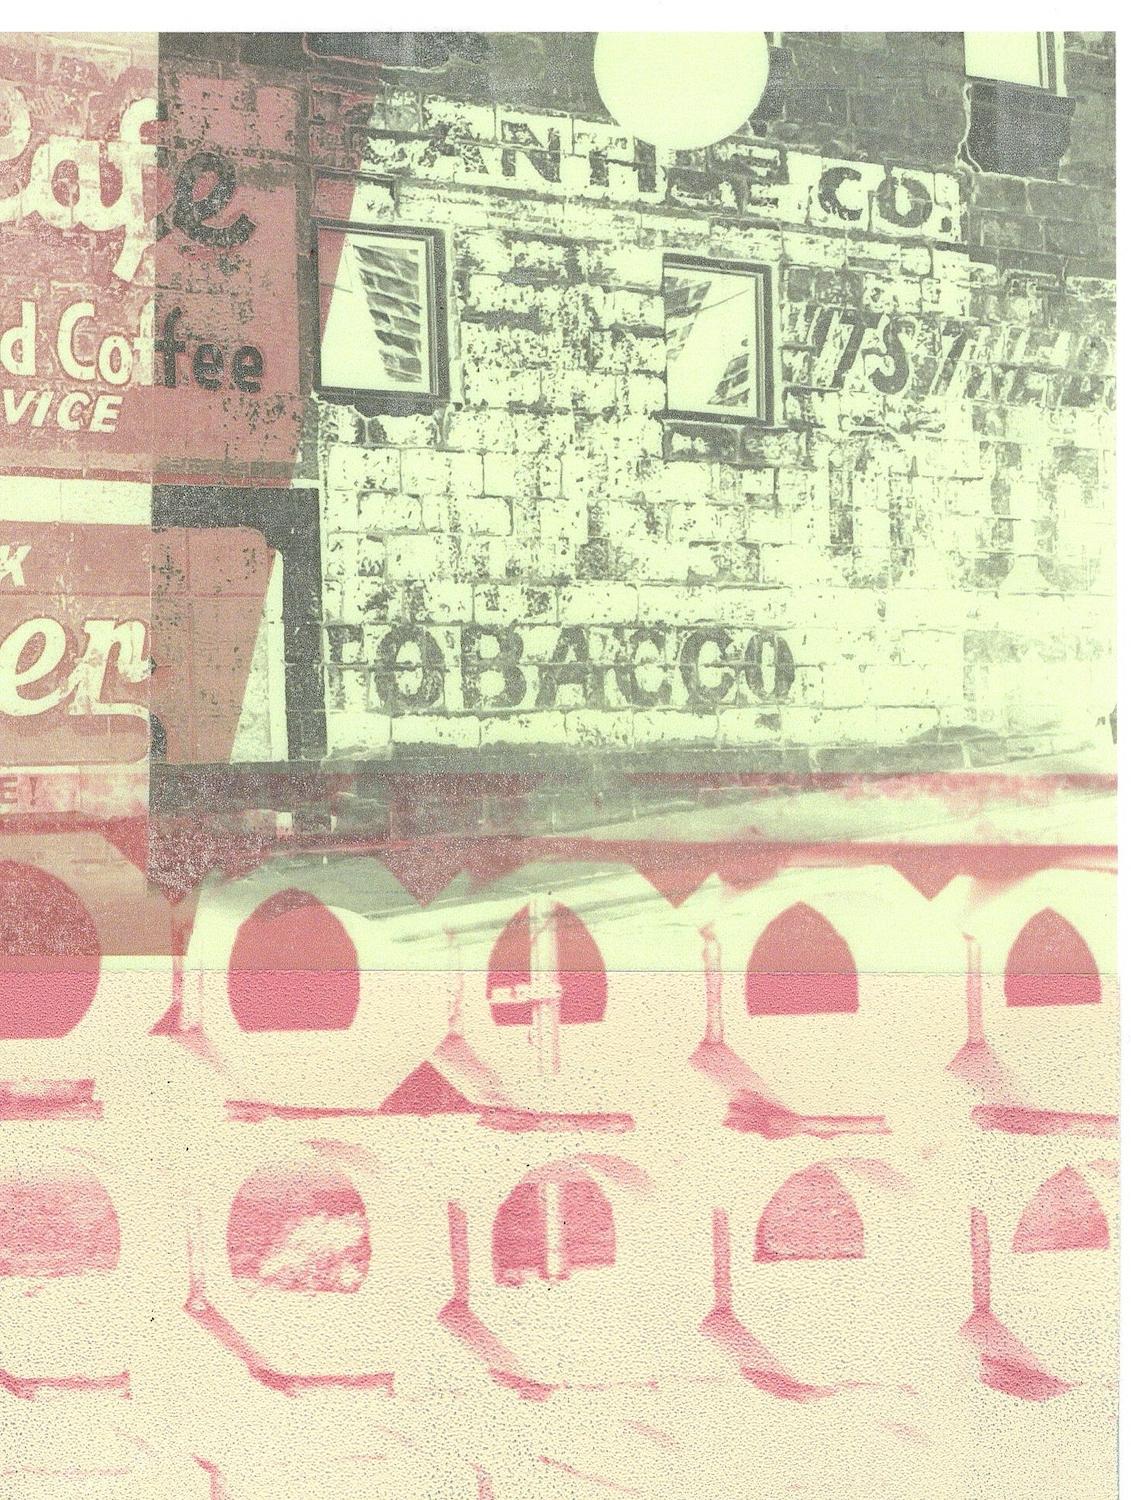 Cropped and deconstructed images of a brick wall with a painted advertisement for a vintage cafe, four sets of mannequin legs, and cement barrier of hexagonal forms are represented on 14 x 11 inch Yupo translucent paper in Patty deGrandpre’s